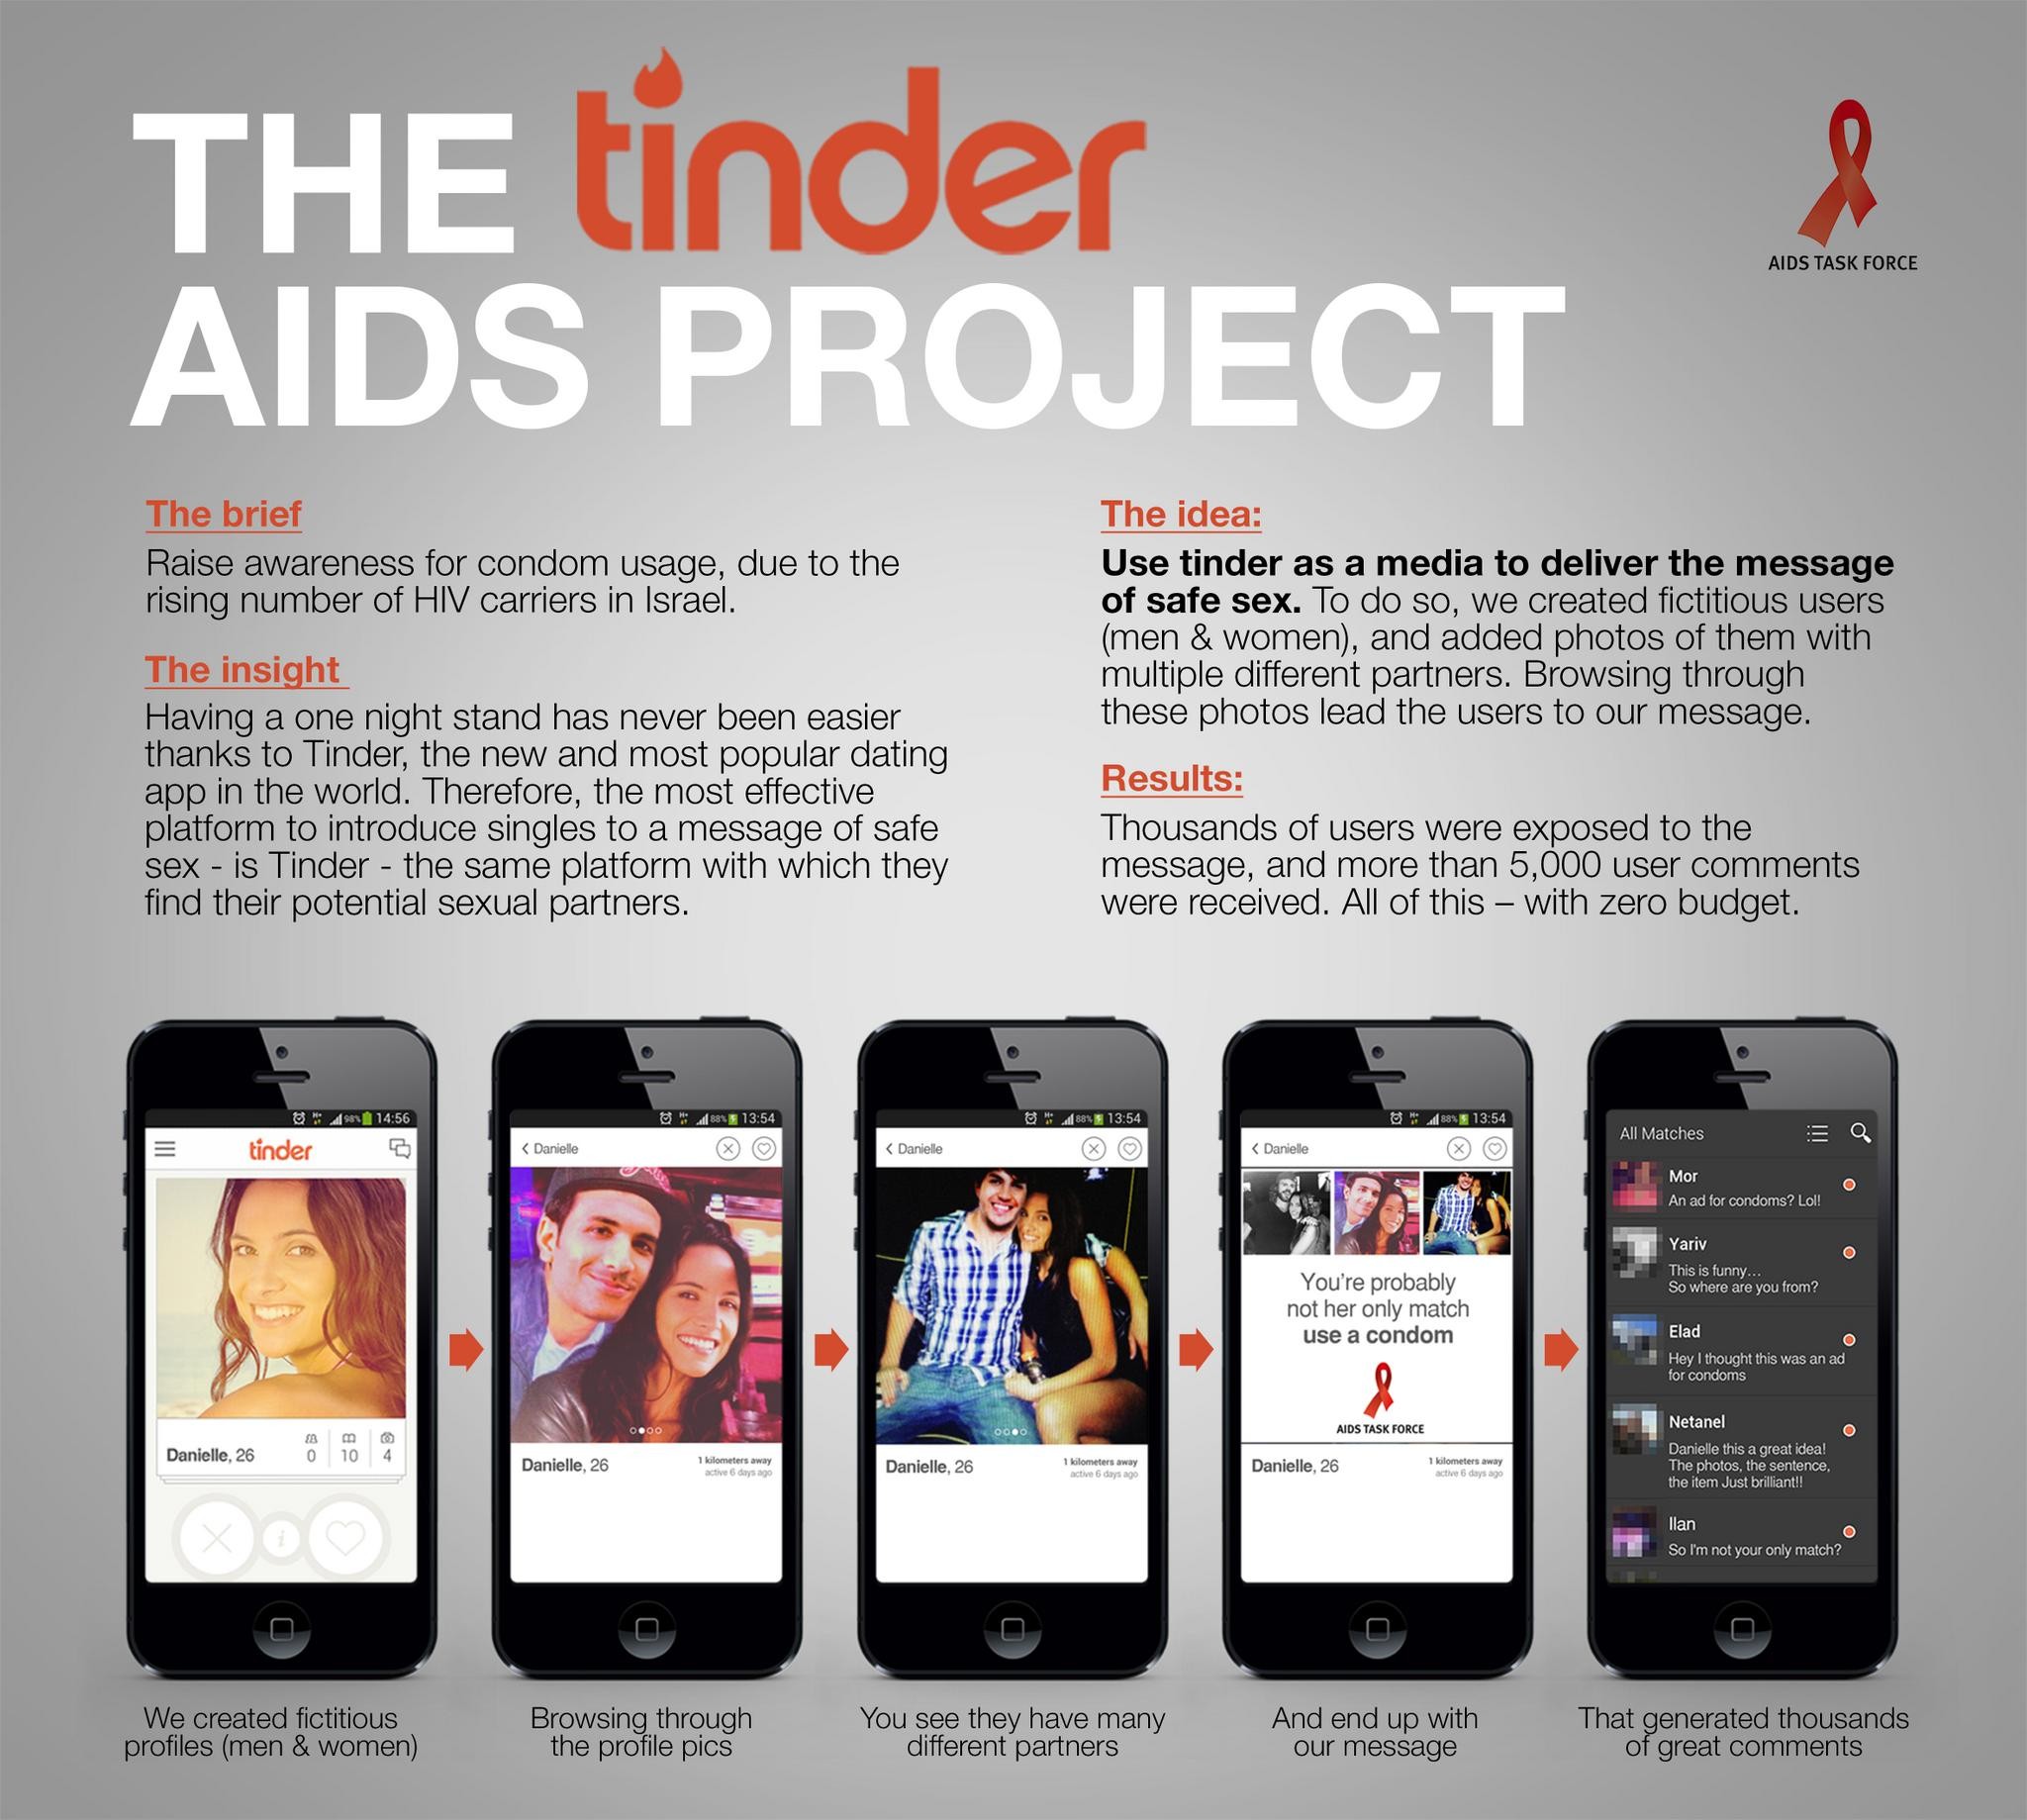 THE TINDER AIDS PROJECT